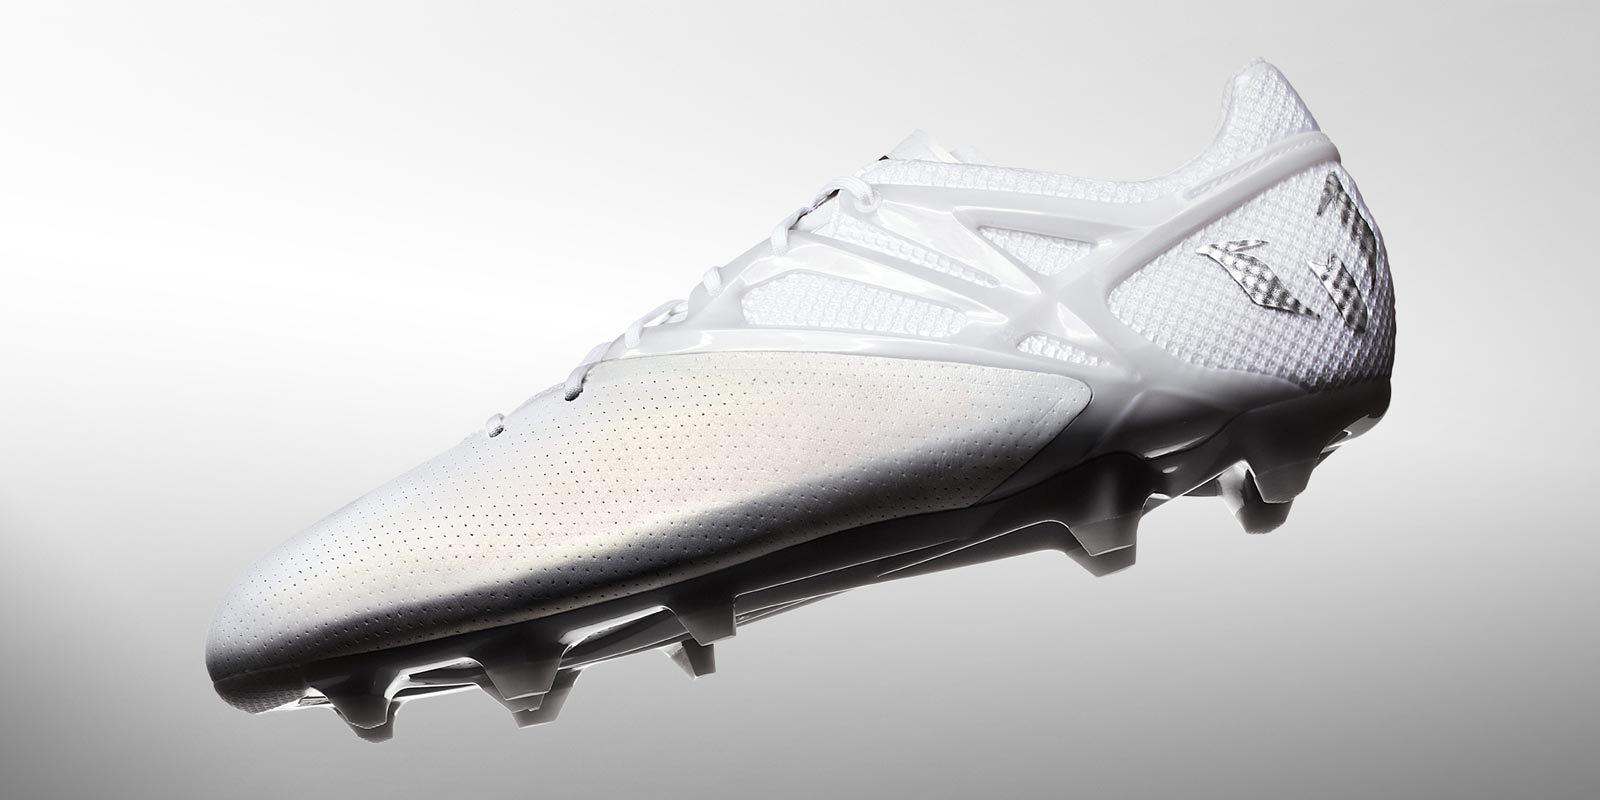 Adidas Messi 2015 Ballon d'Or Boots Released - Messi 15 ...